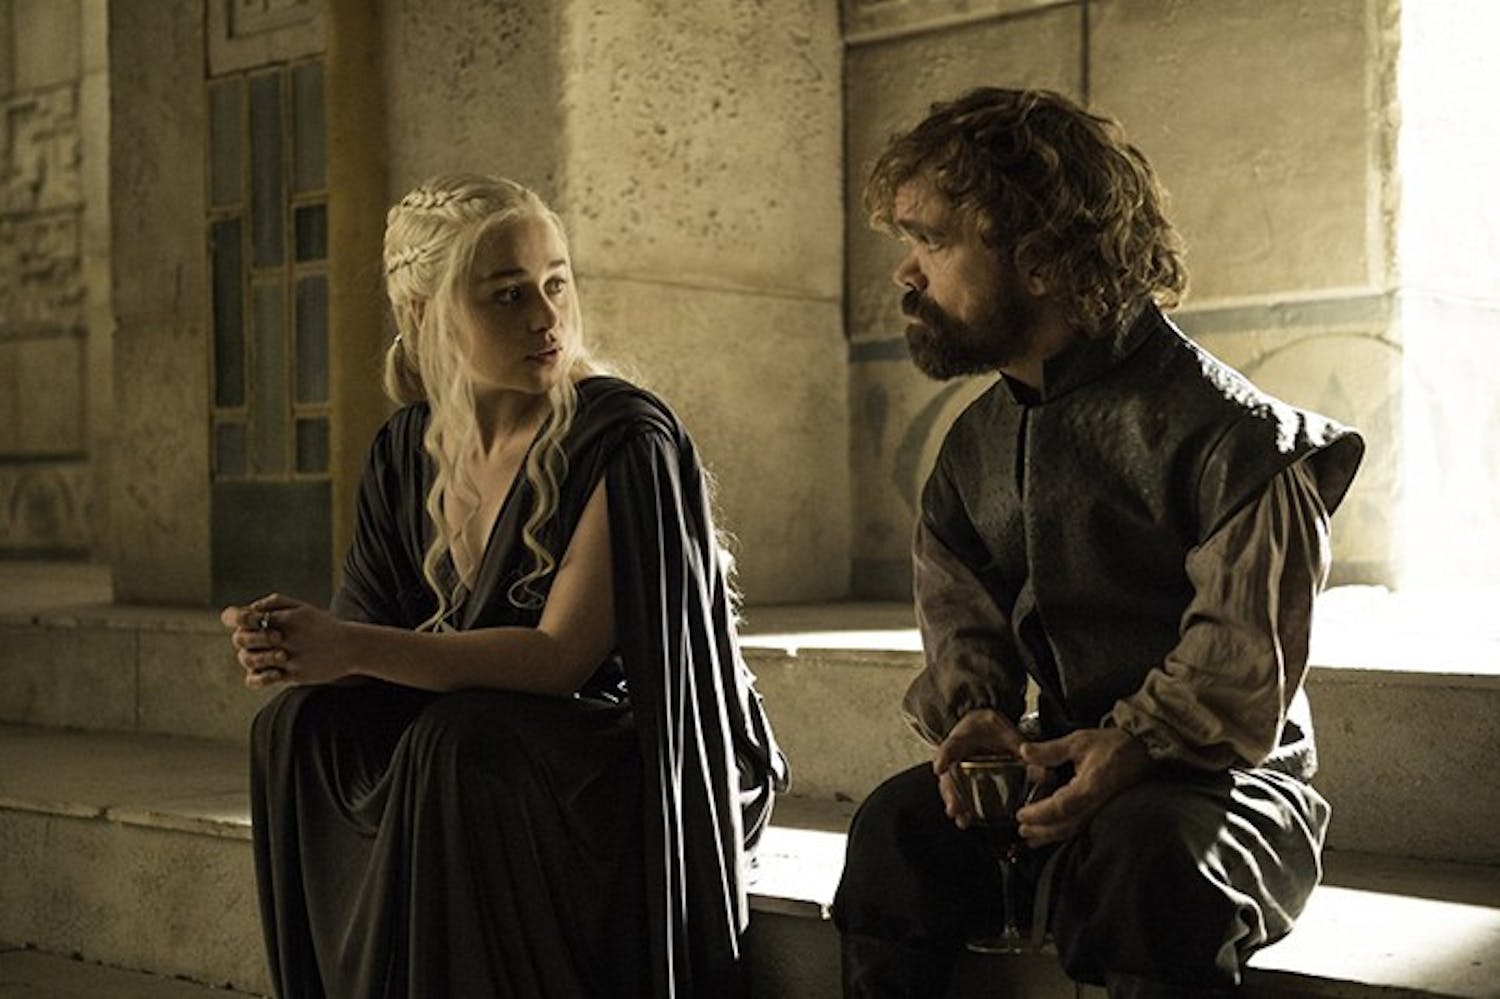 Daenerys Targaryen (left, portrayed by&nbsp;Emilia Clarke) and&nbsp;Tyrion Lannister (right, portrayed by&nbsp;Peter Dinklage) in HBO's "Game of Thrones."